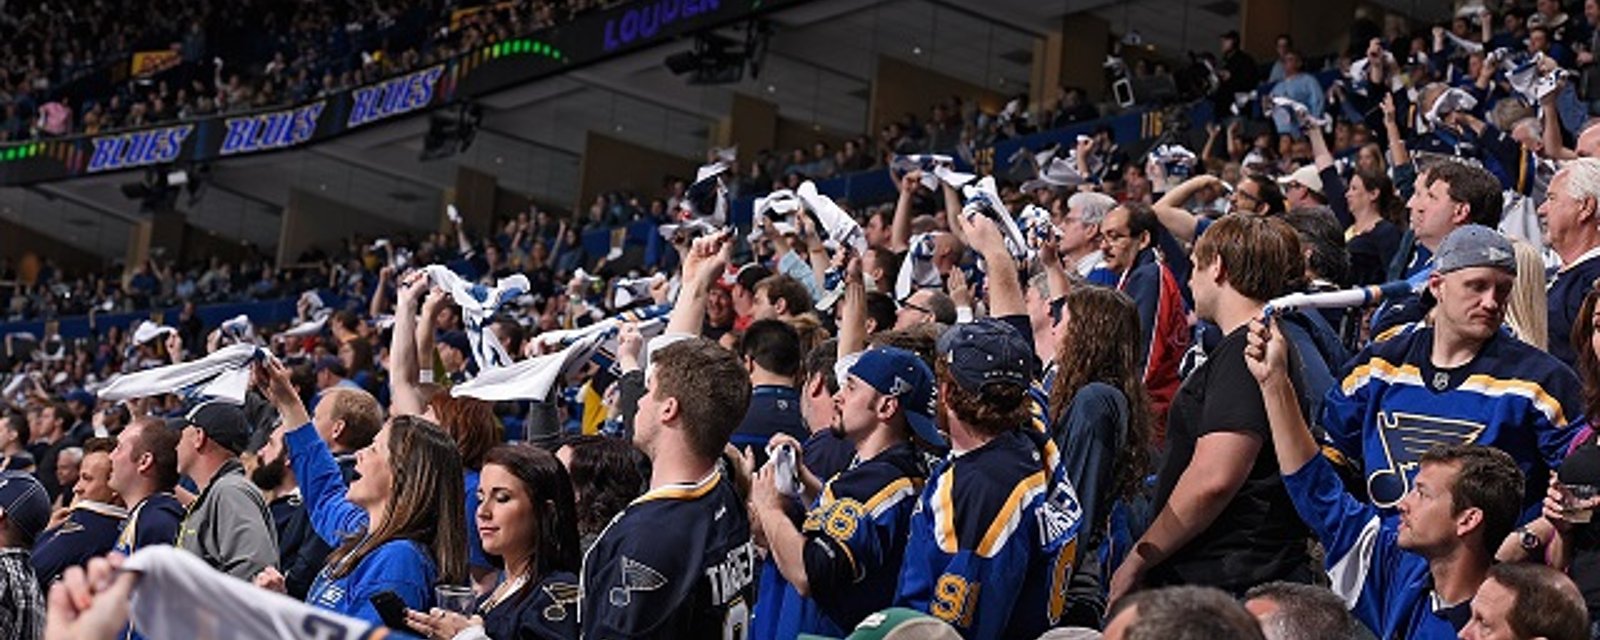 Breaking: Blues fans receive concerning message as they enter their arena…